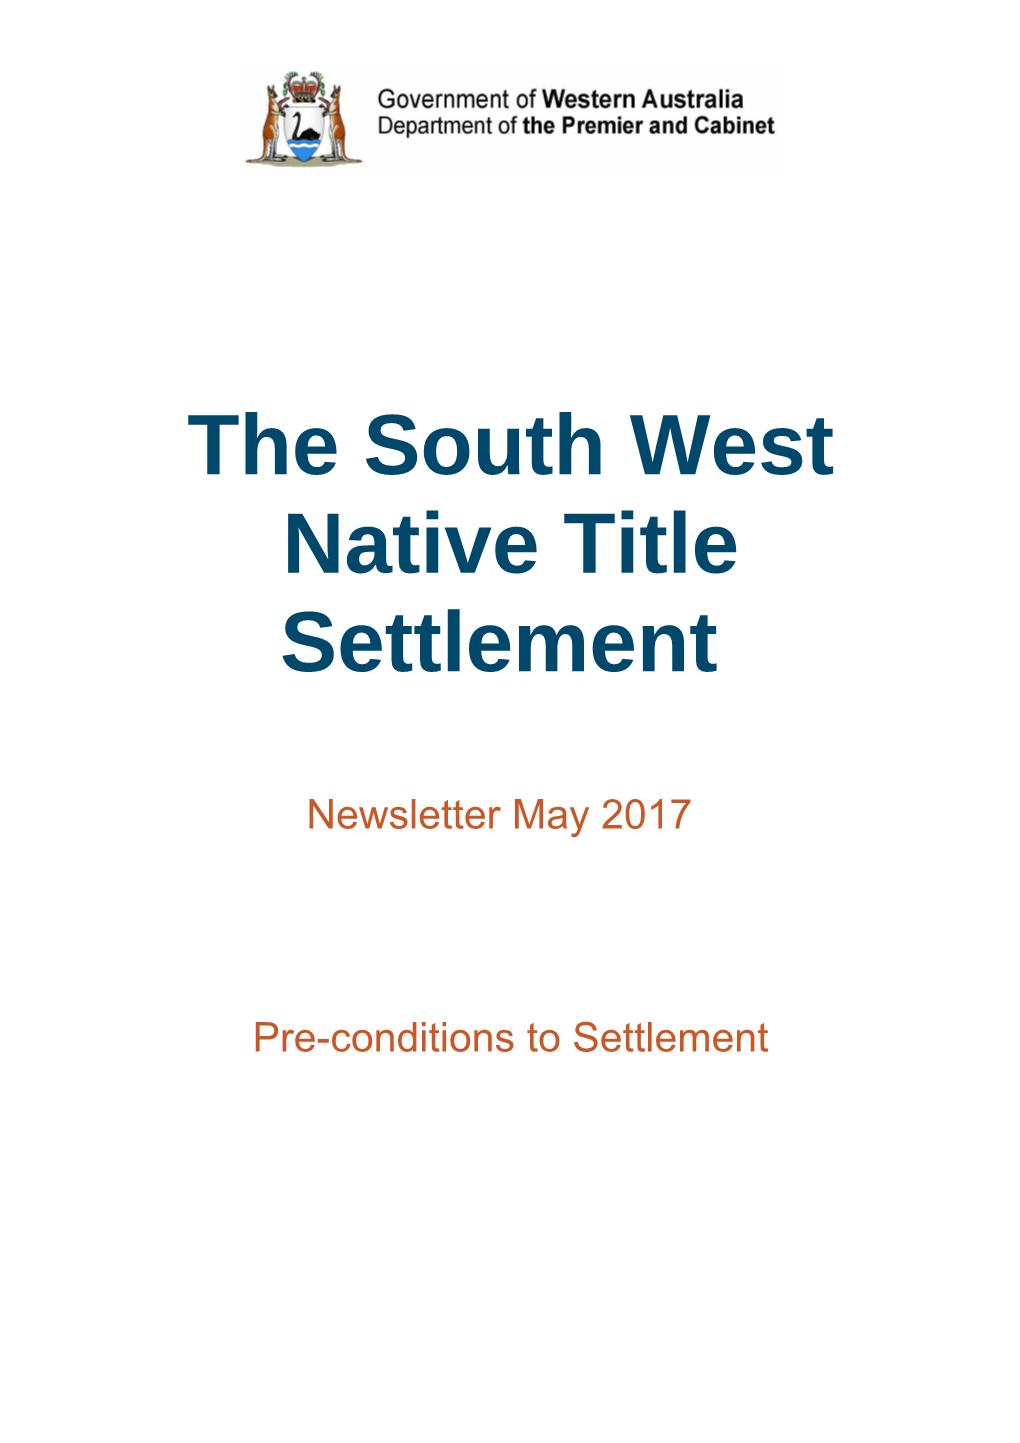 The South West Native Title Settlement